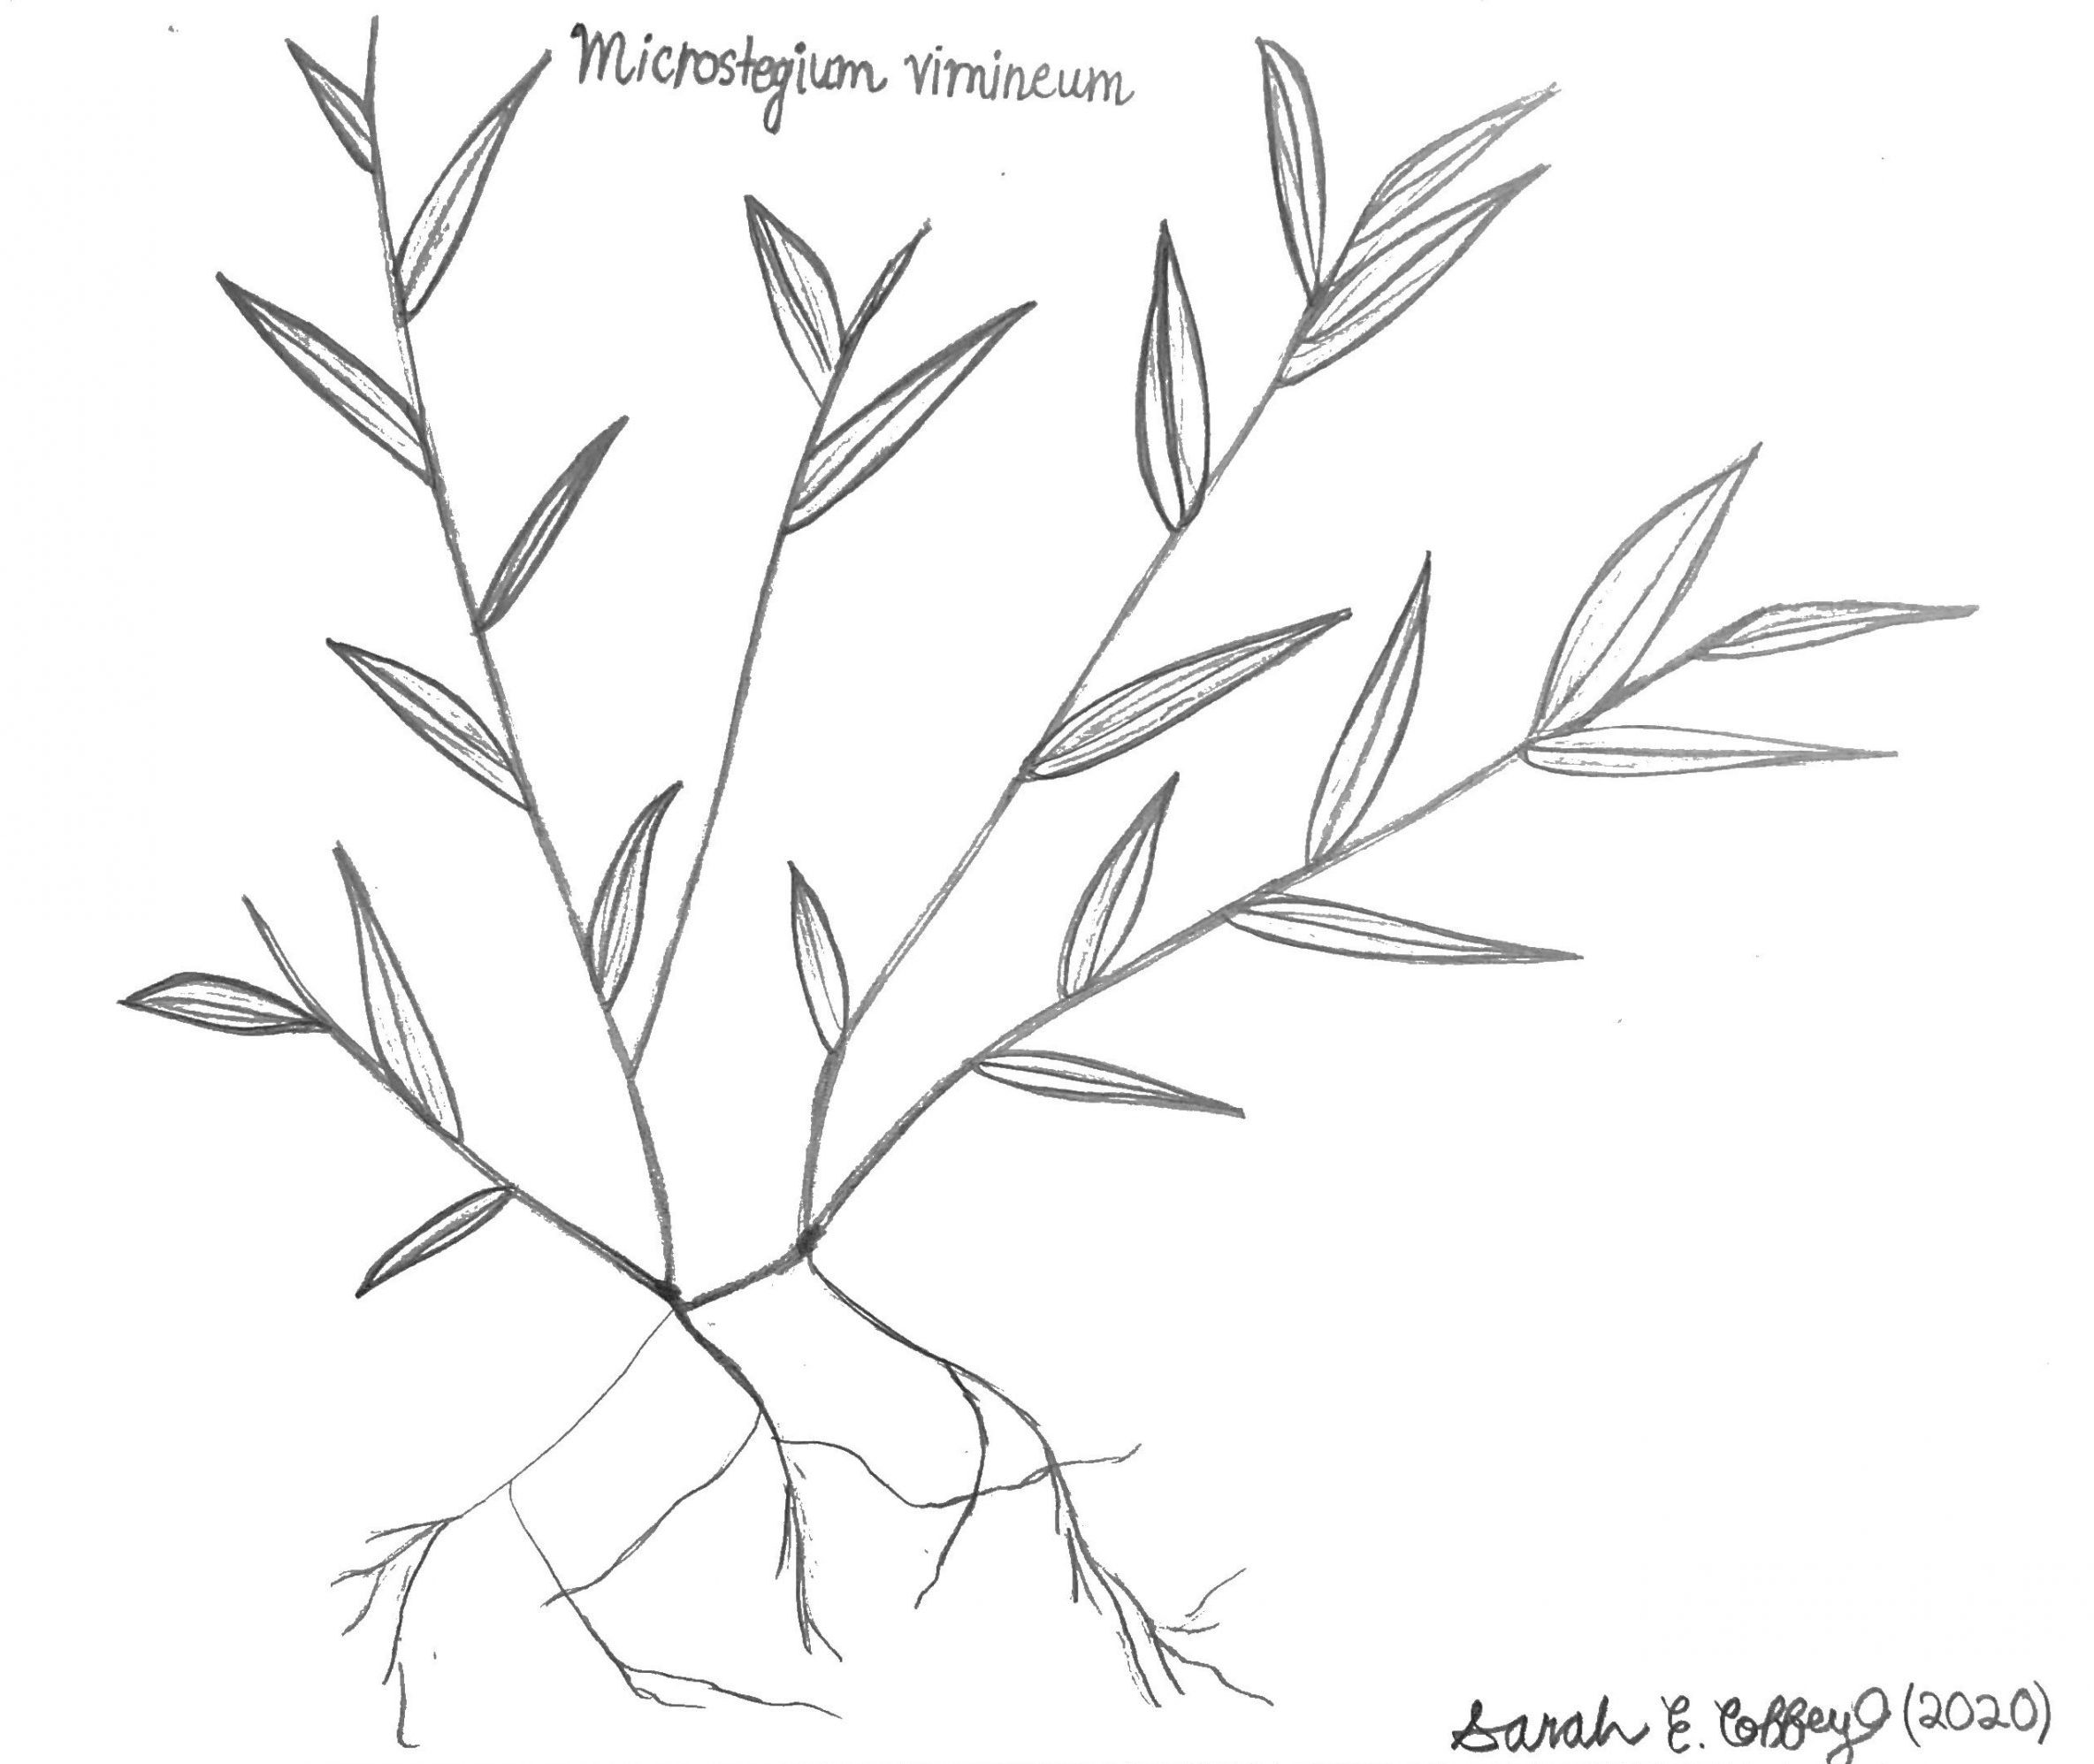 Sketch showing what Japanese stiltgrass looks like